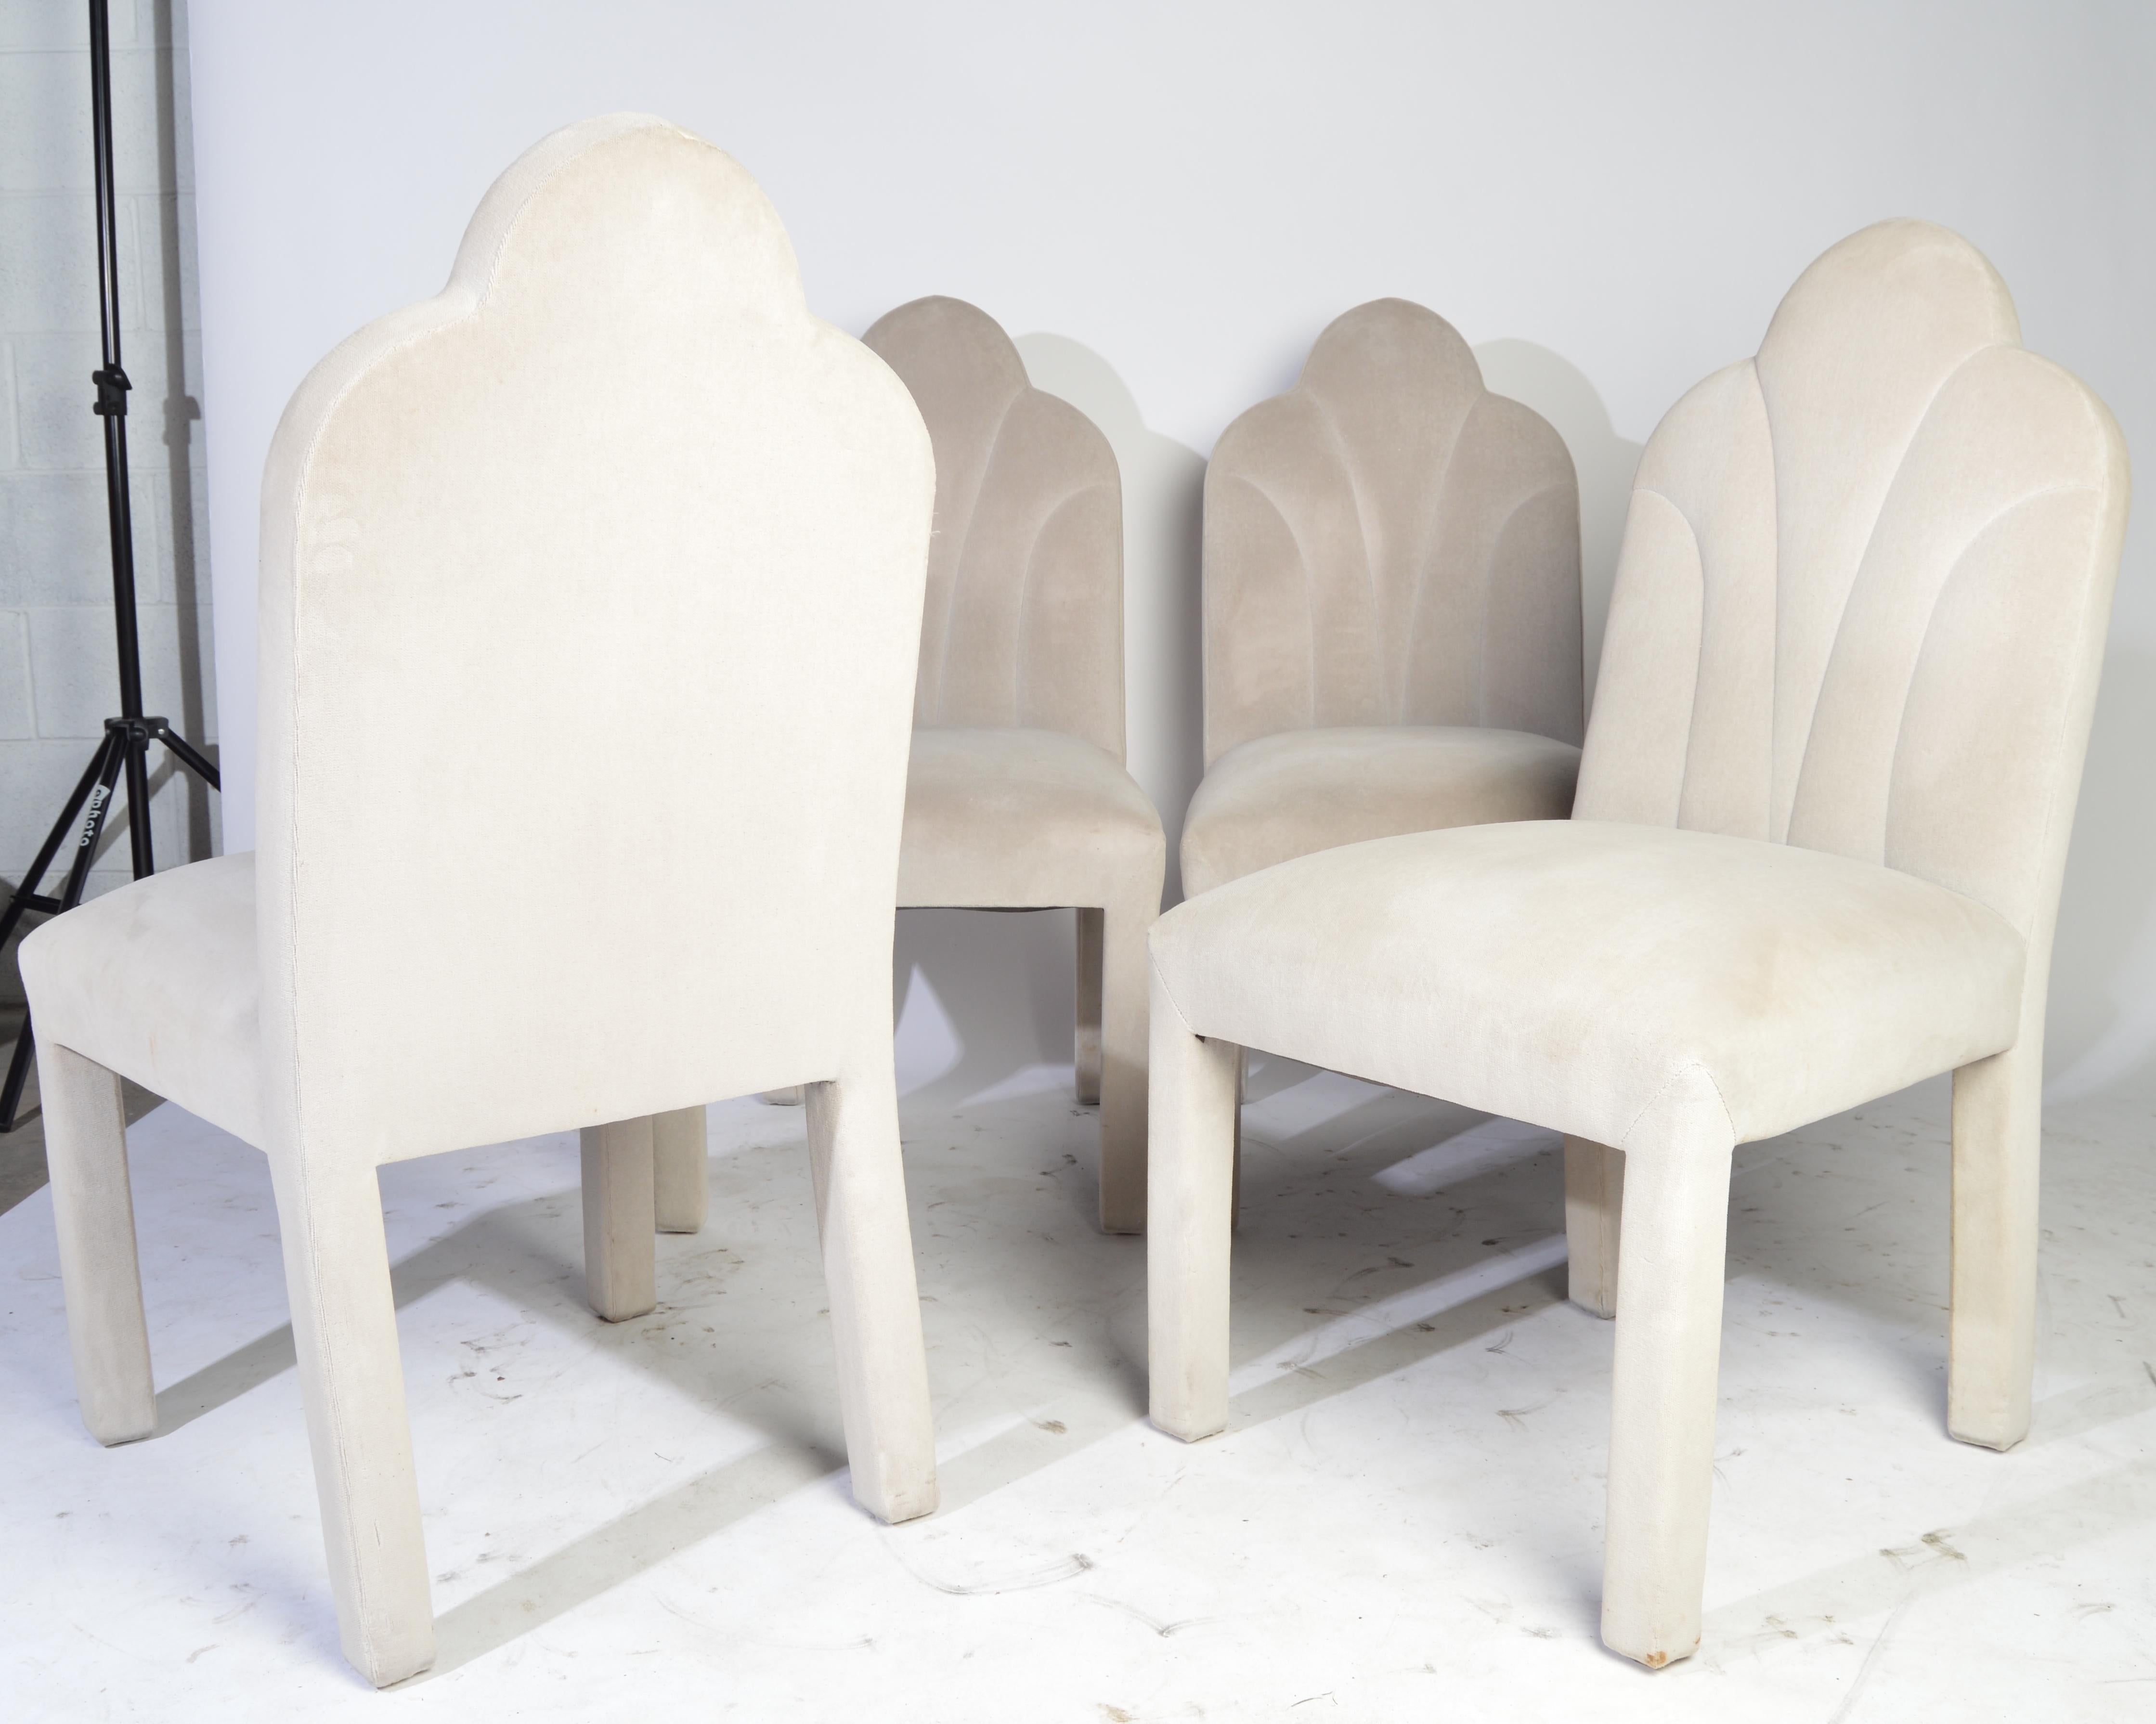 A fabulous set of 6 Art Deco Revival dining chairs by Lenwood Furniture Co. Inc. of N.C. having soft velvet upholstery circa 1970.
Beautiful overall condition having a few tiny spots from as shown in the images provided. Solid and sturdy.
Seat